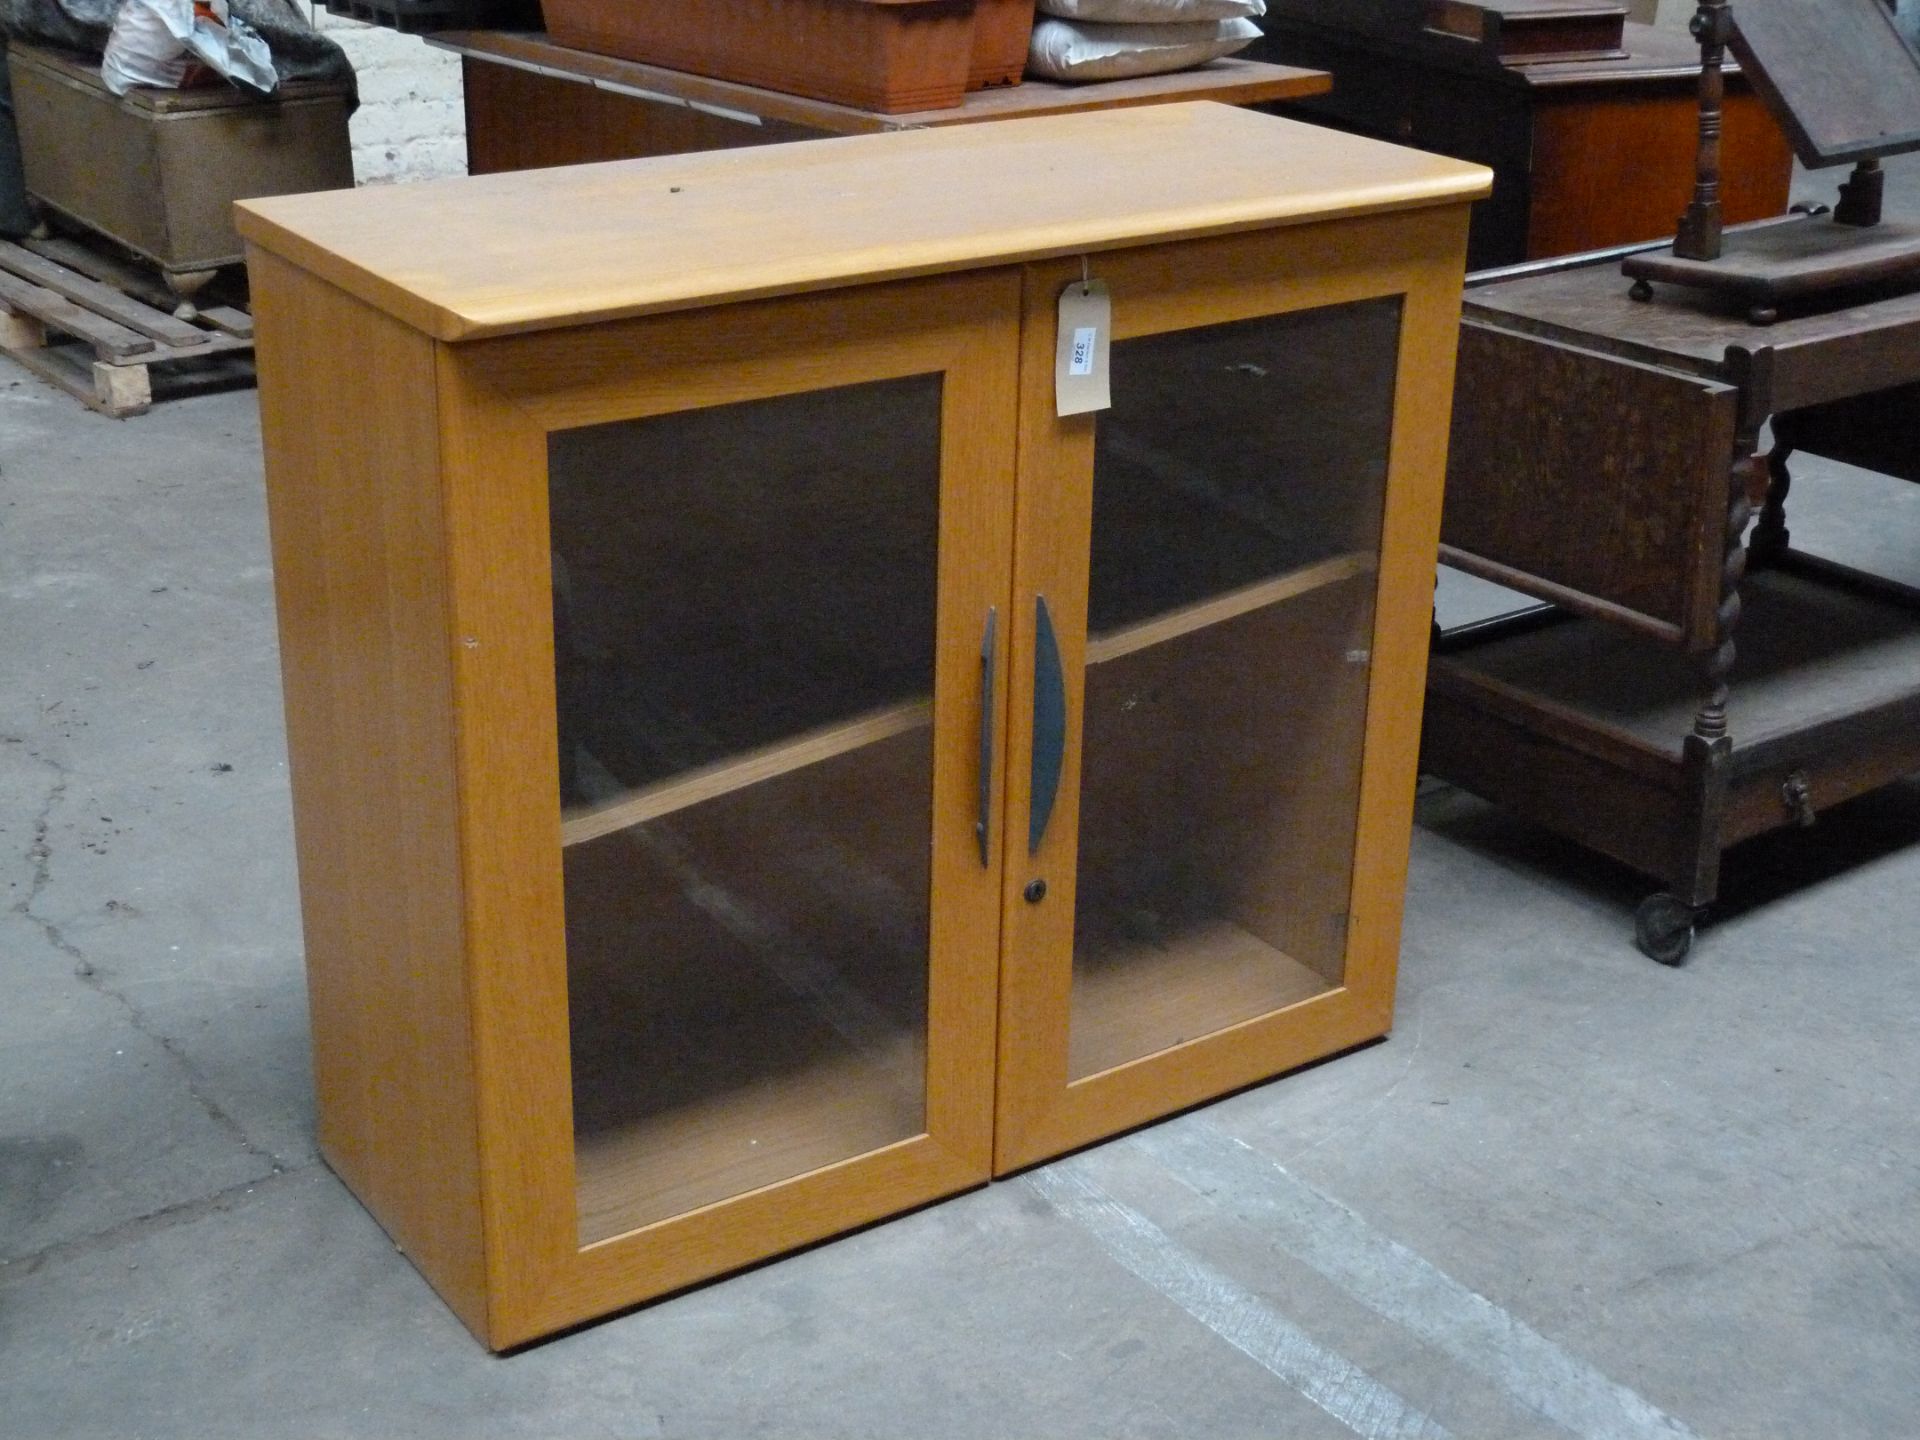 A glass fronted display unit